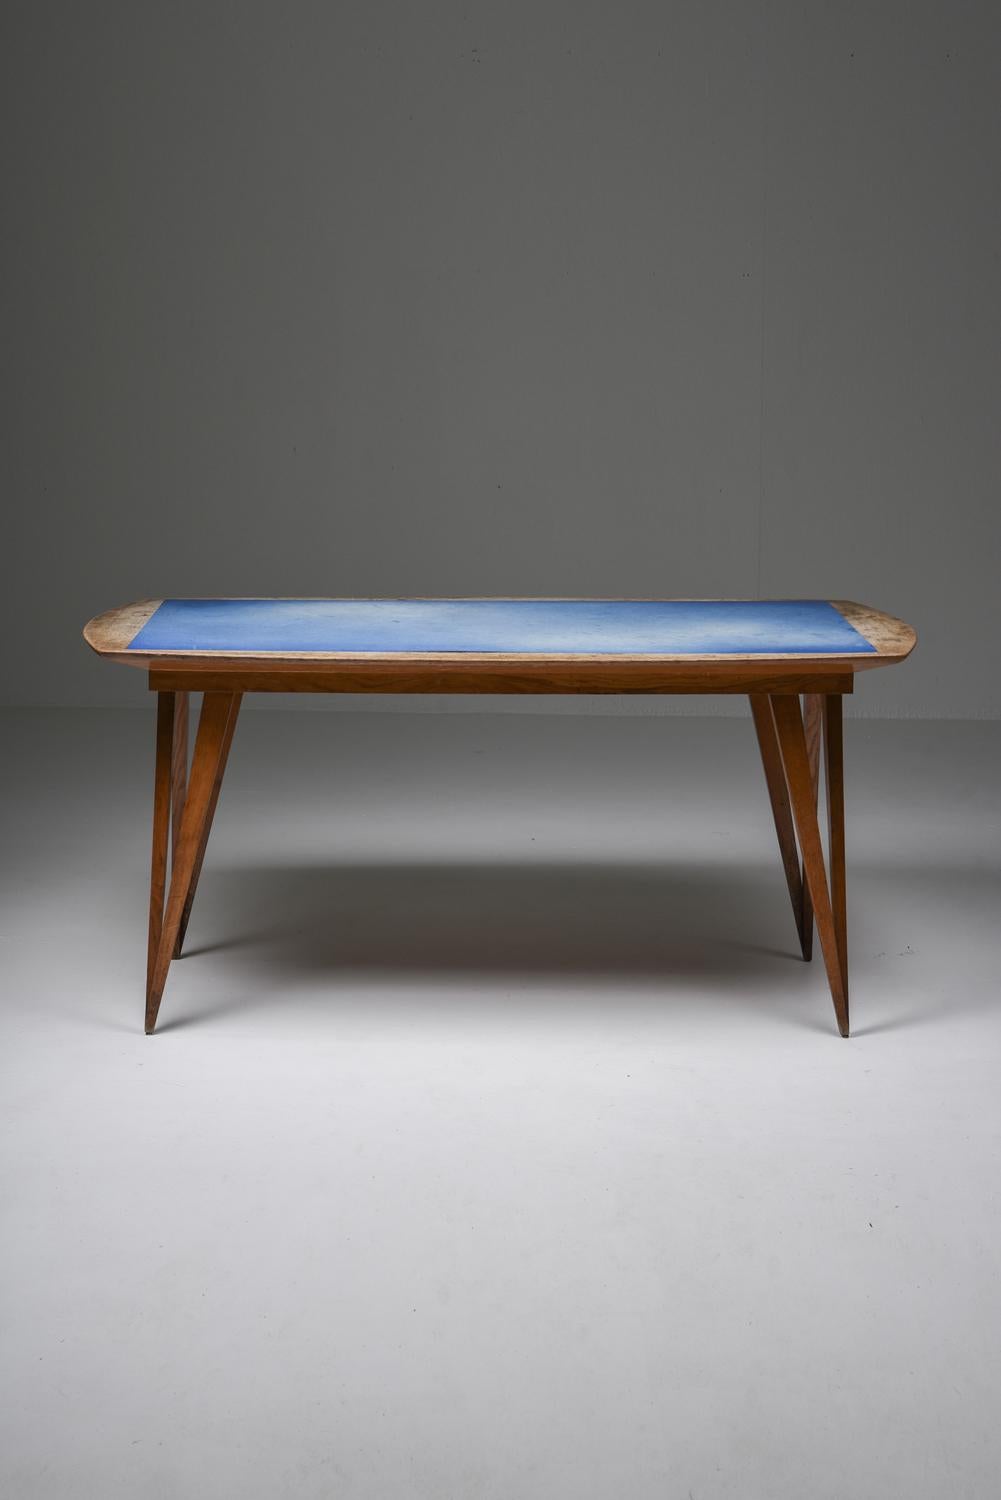 Oak Mid-Century Modern Dining Table on Pin Legs with Blue Top 1